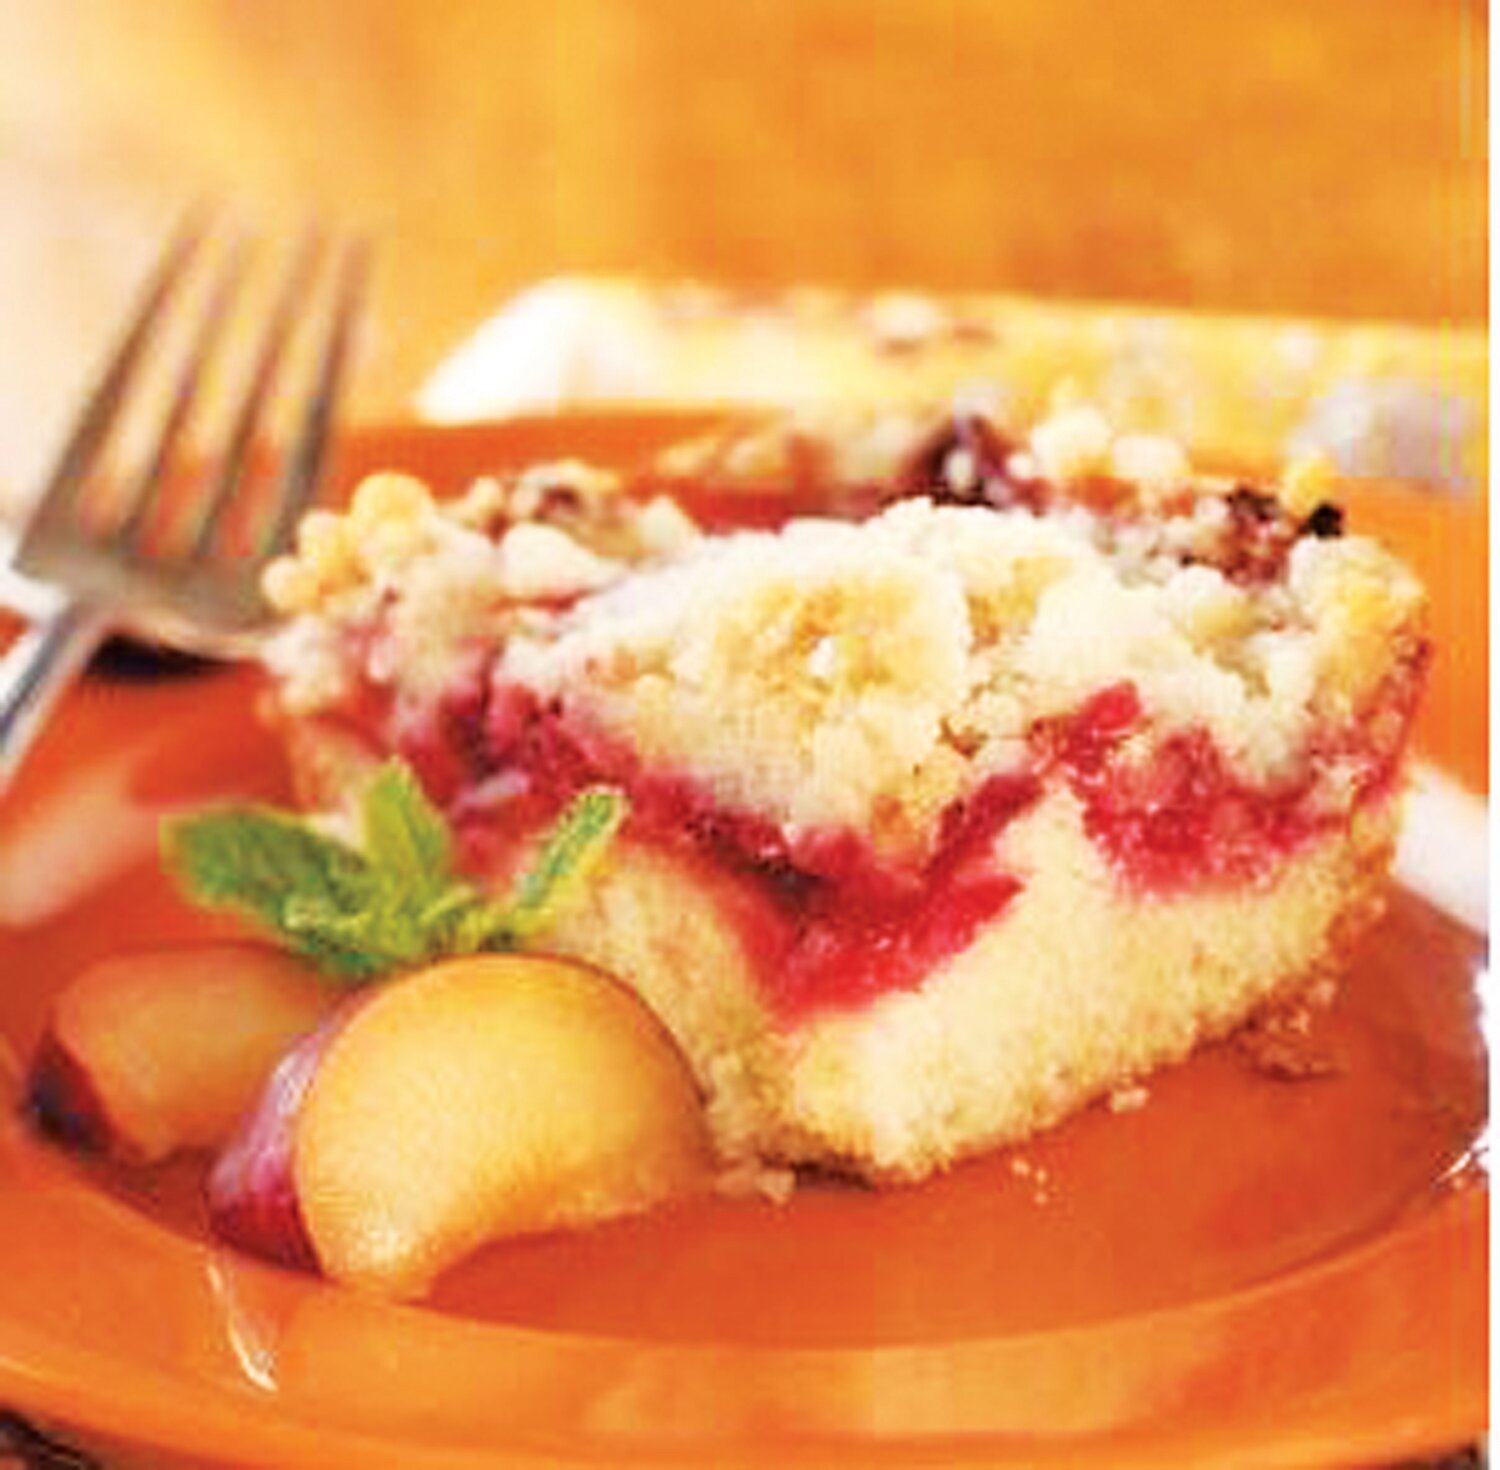 Plums are in season locally and work well in desserts such as this Viennese Plum Cake.